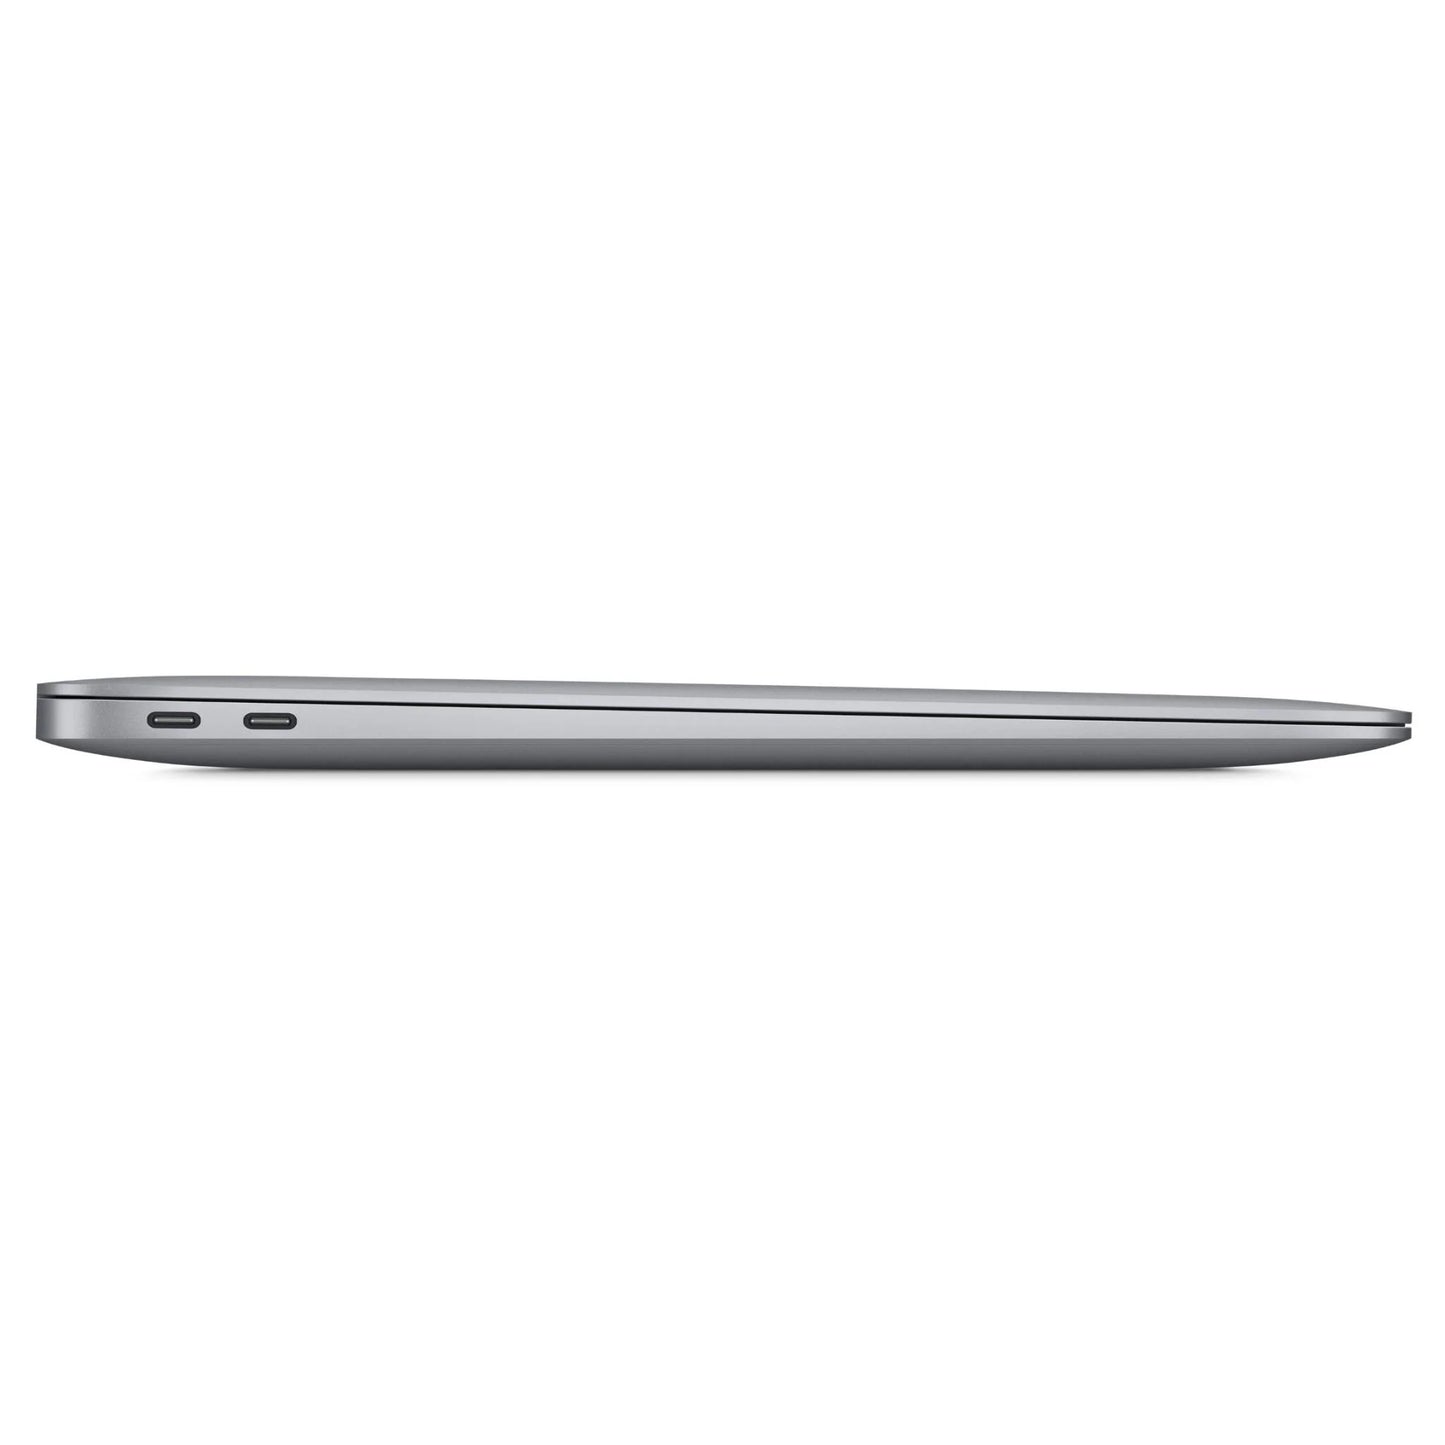 Apple MacBook Air 13-inch with M1 chip, 7-core GPU, 256GB SSD (Grey) (Preowned